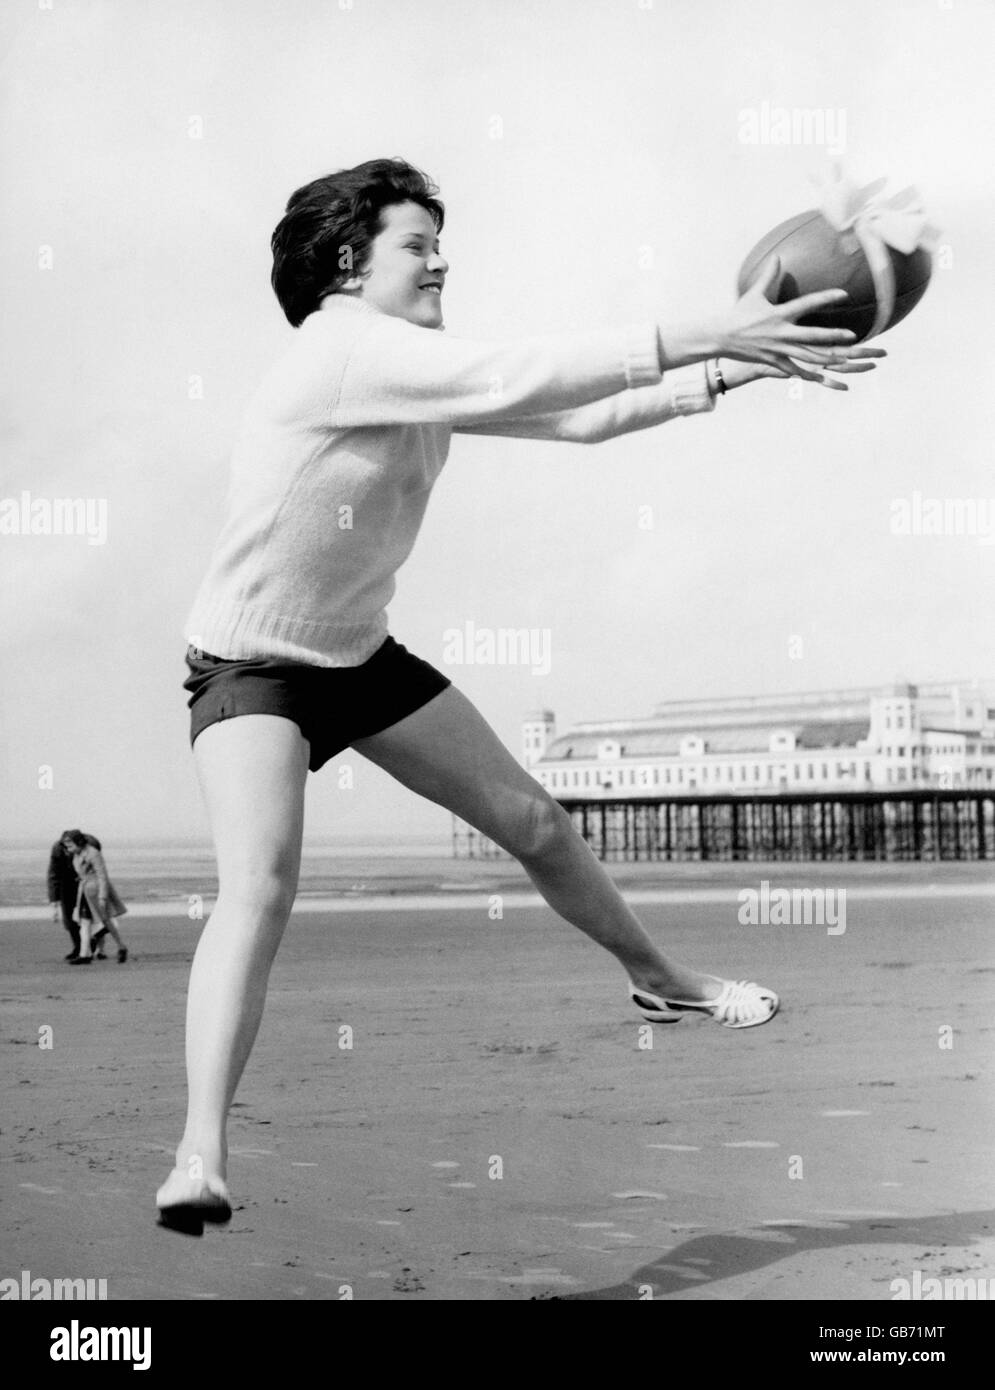 British Holidays - The Seaside - Weston-Super-Mare - 1959. Sally Alford catches a rugby ball with a decorative ribbon on the beach at Weston-Super-Mare. Stock Photo